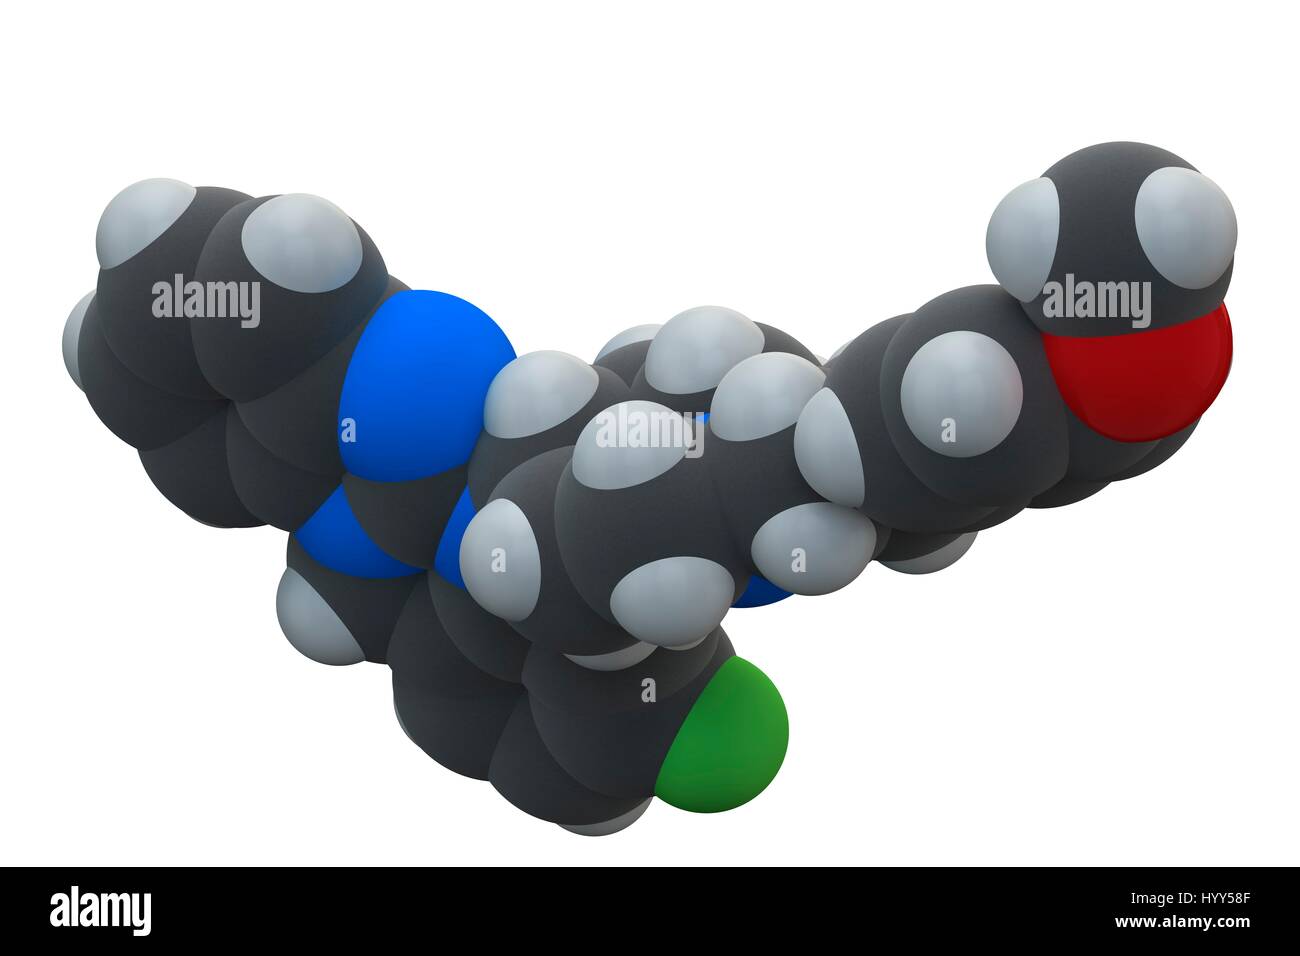 Astemizole allergy drug molecule. Chemical formula C28H31FN4O. Atoms are represented as spheres: carbon (grey), hydrogen (white), nitrogen (blue), oxygen (red), fluorine (green). Illustration. Stock Photo